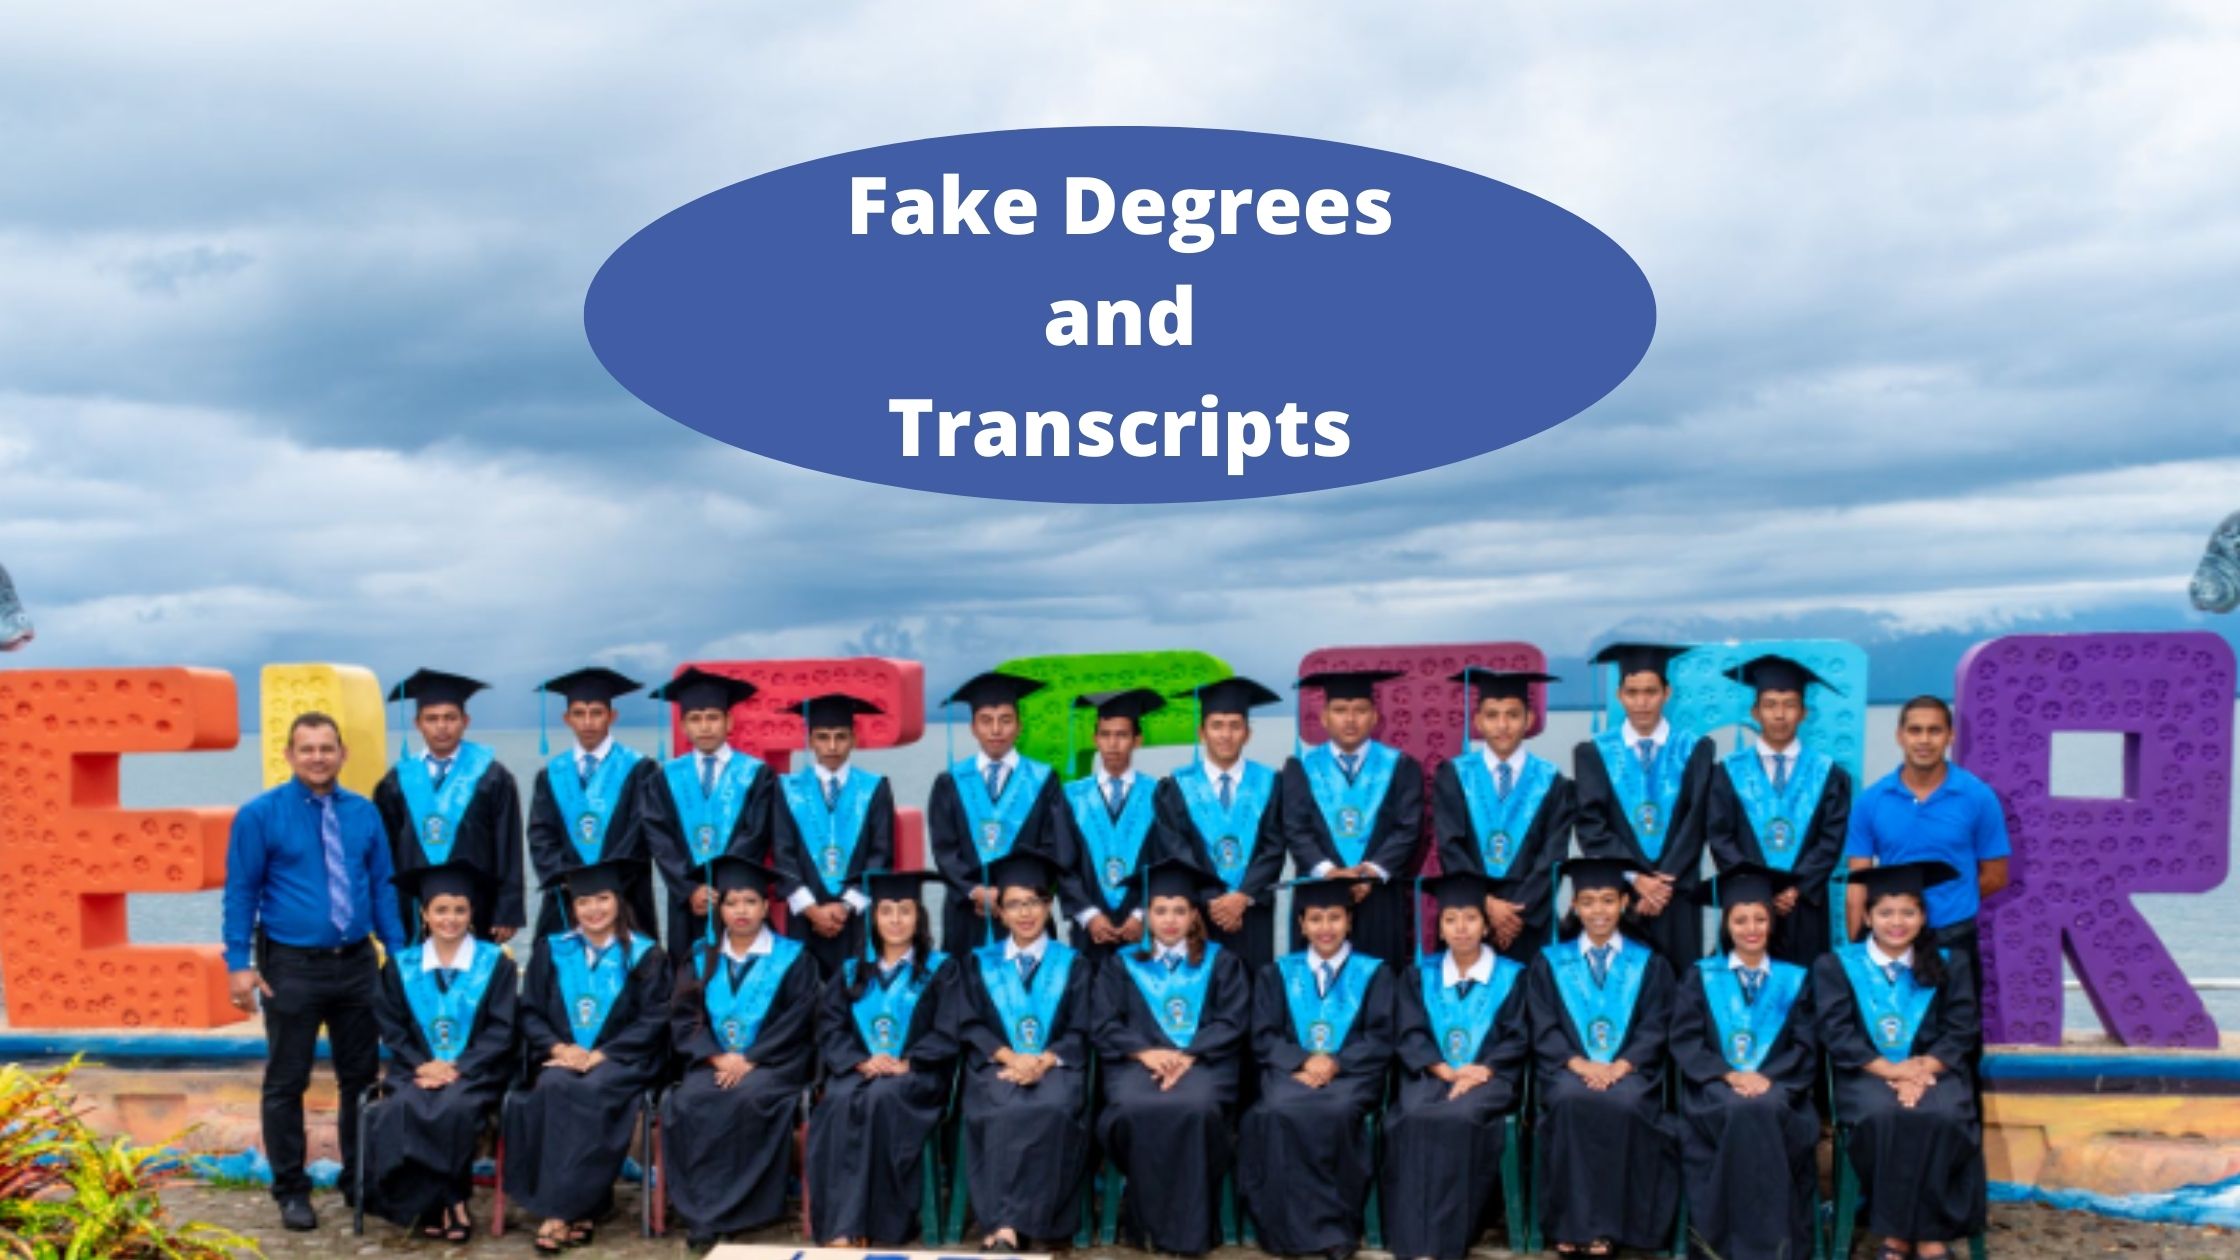 Fake Degrees and Transcripts